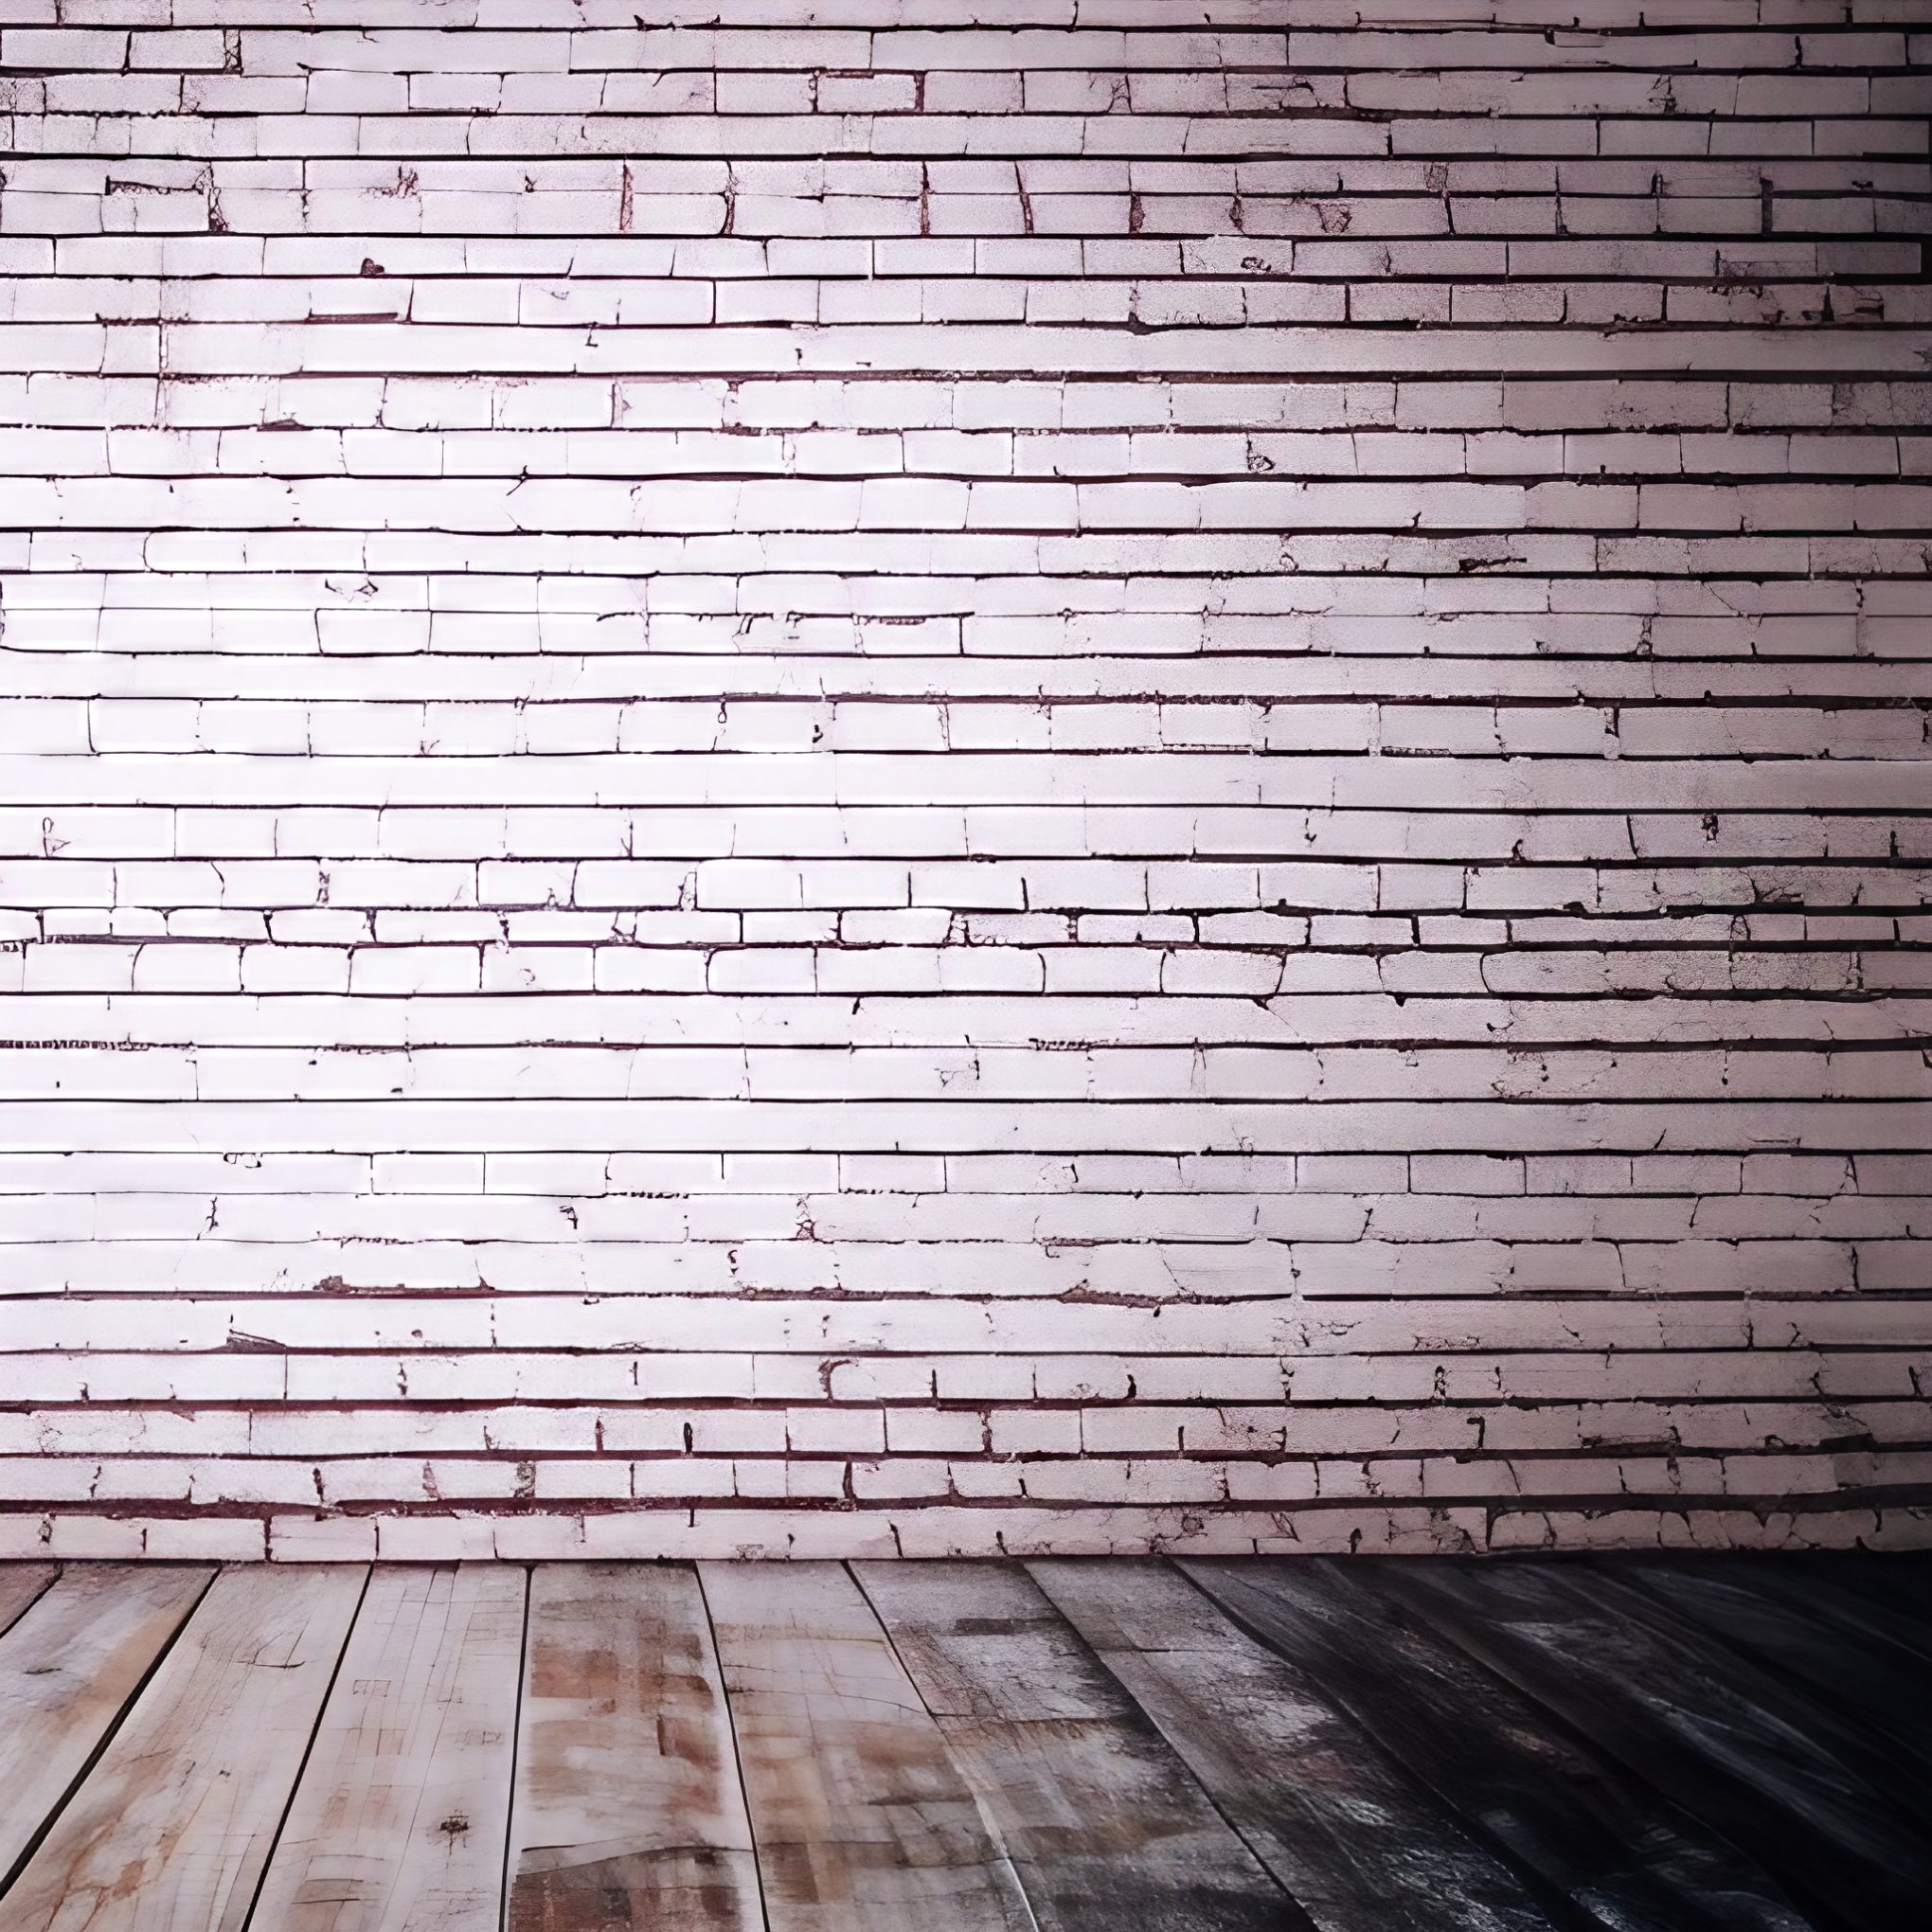 White Brick Wall and Floorboards Bright Room Free Stock Image